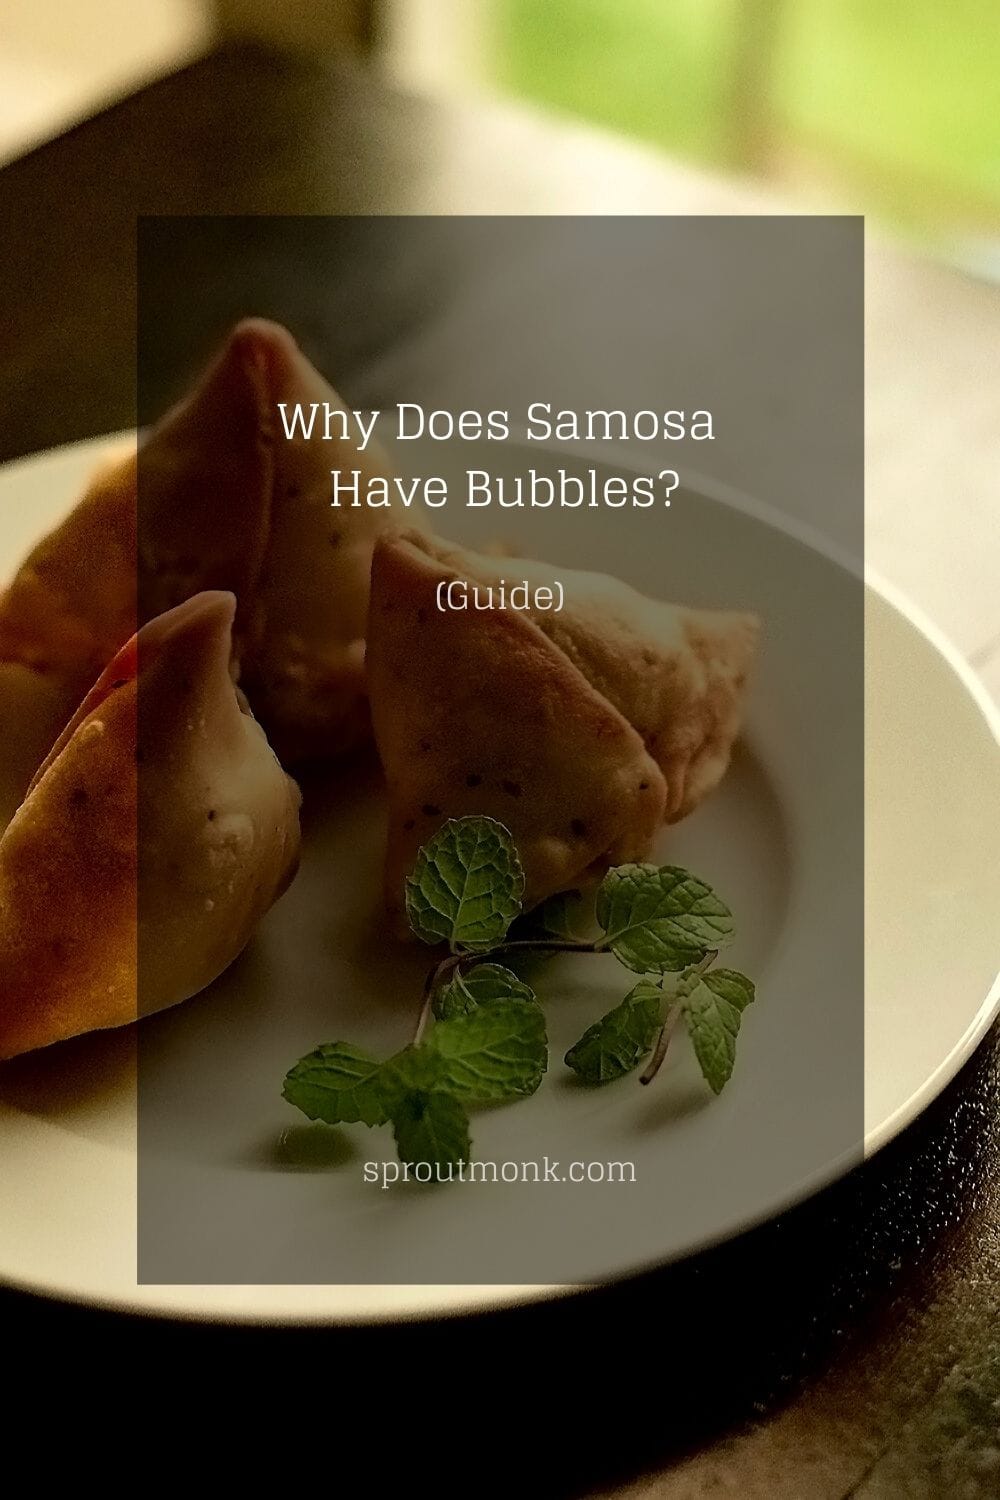 cover image for the guide on why Samosas have bubbles